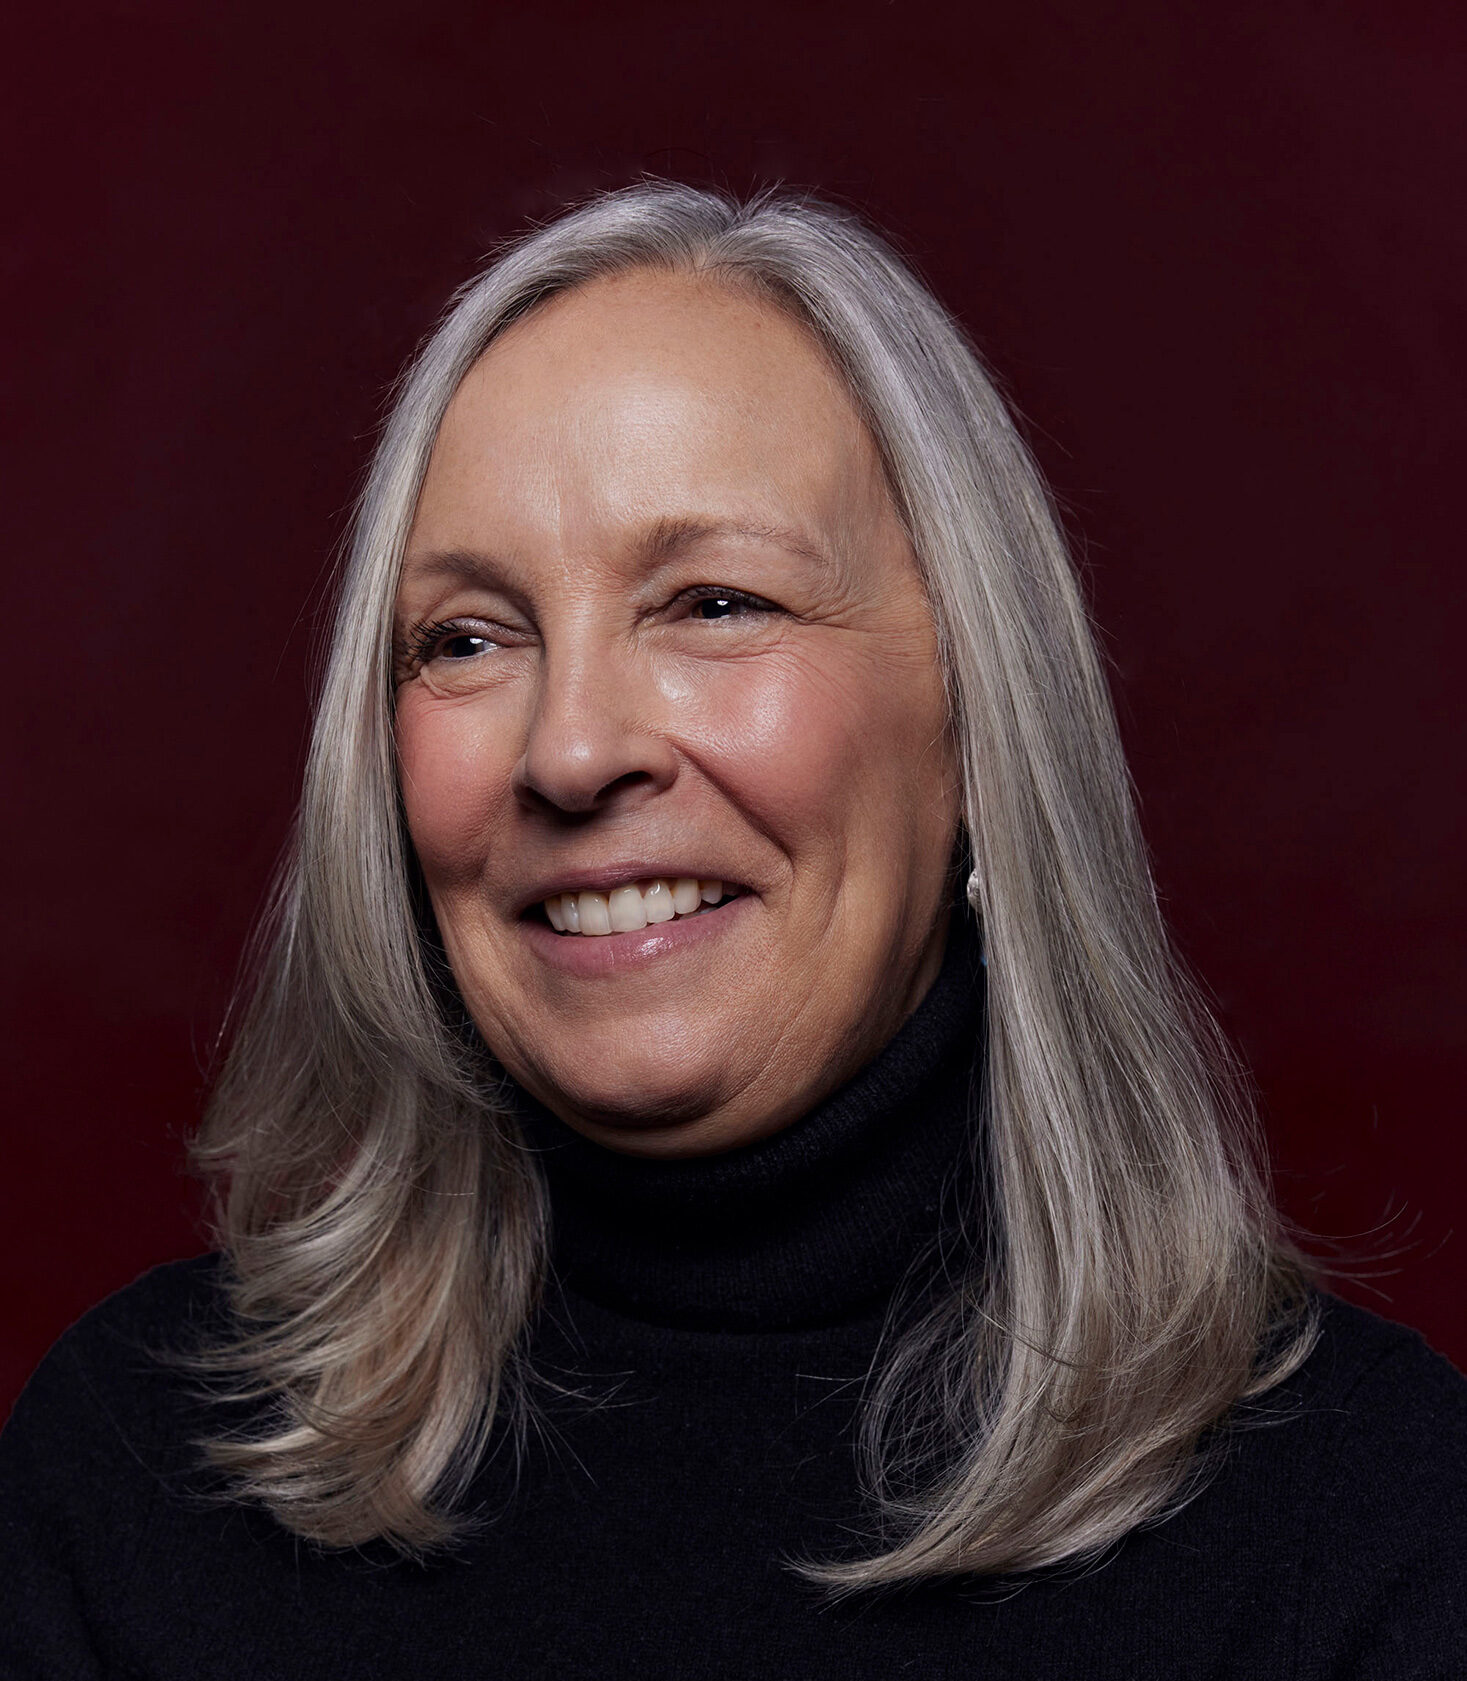 Close up of Prof. Gillian Hadfield in a black turtleneck sweater, smiling against a solid dark-brown background